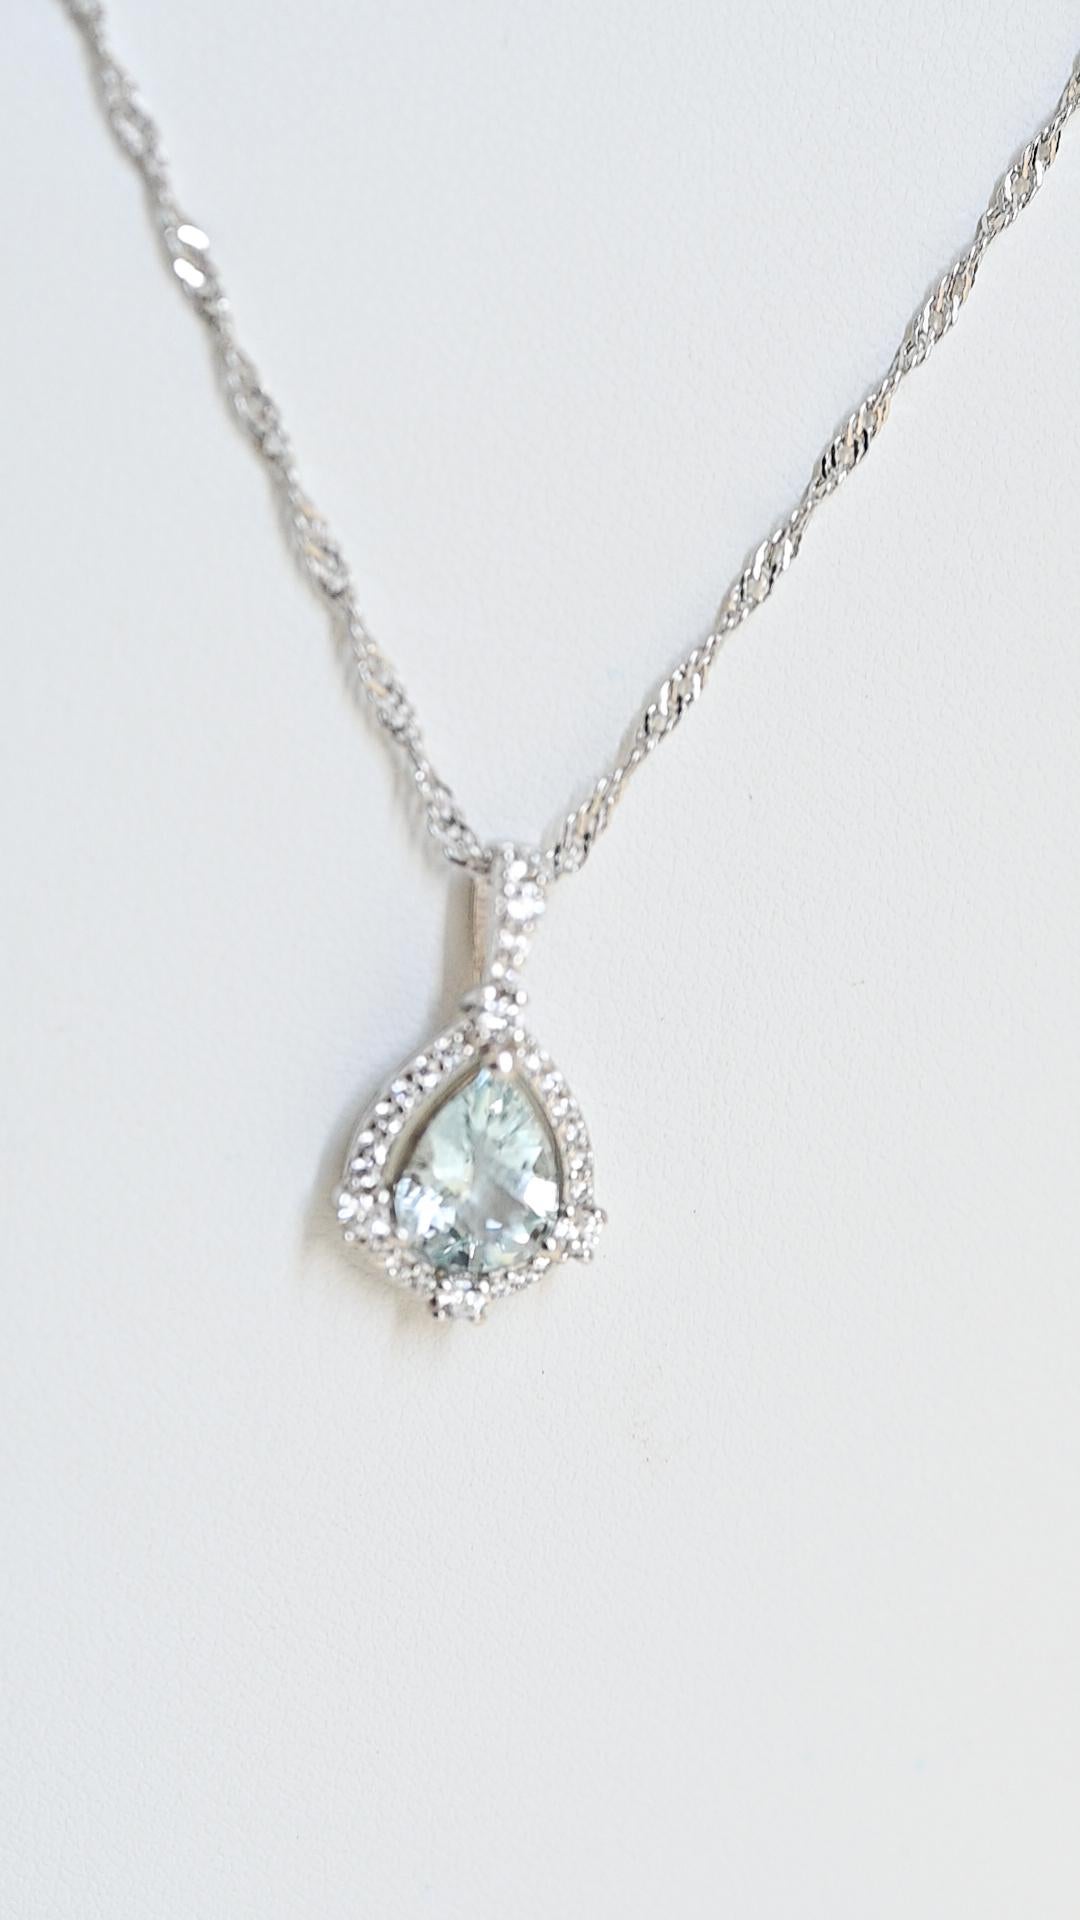 2.10 Cts Aquamarine Bridal Wedding Pendant Necklace Sterling Silver Jewelry  Neuf - En vente à New York, NY